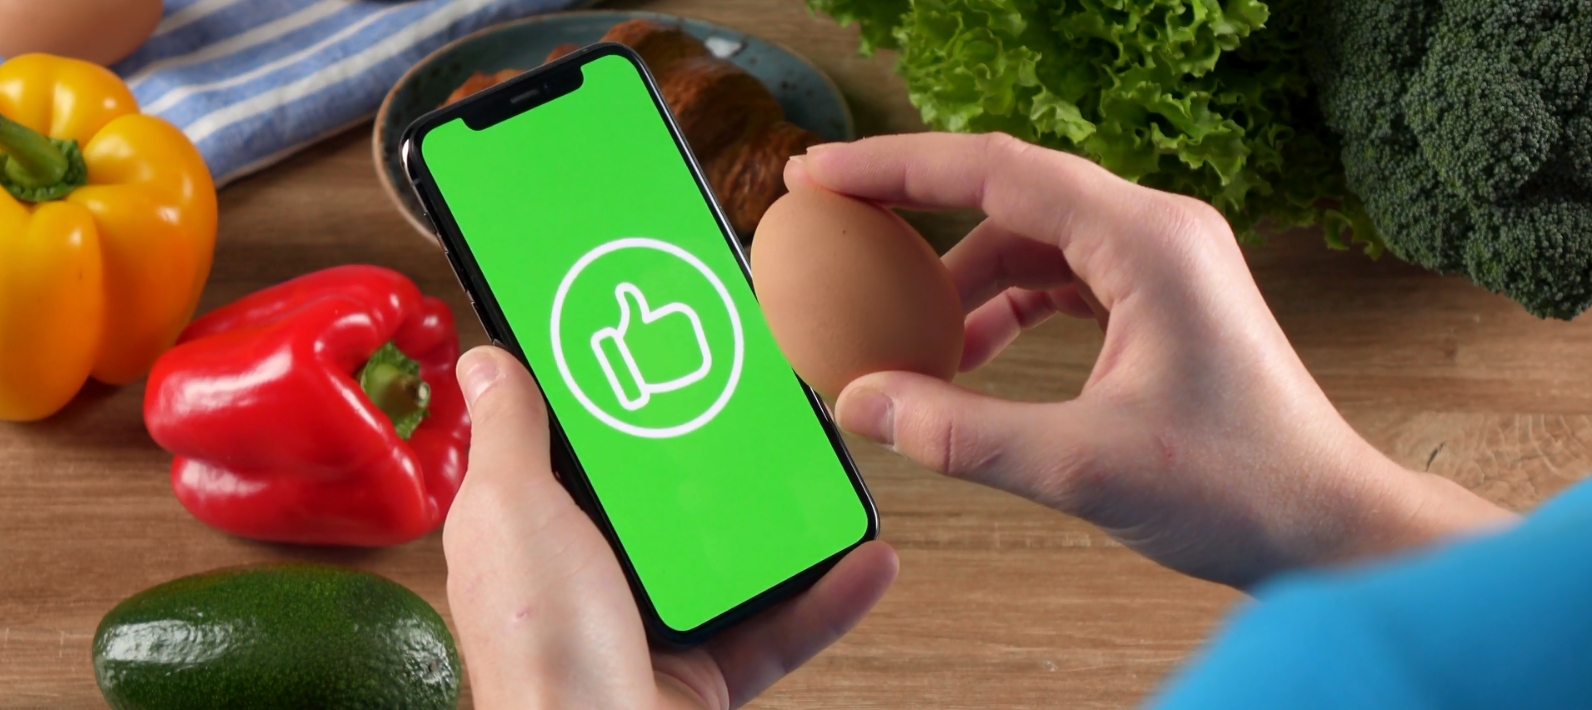 Animated and Live Action Videos for Keto.app cover egg vegetables